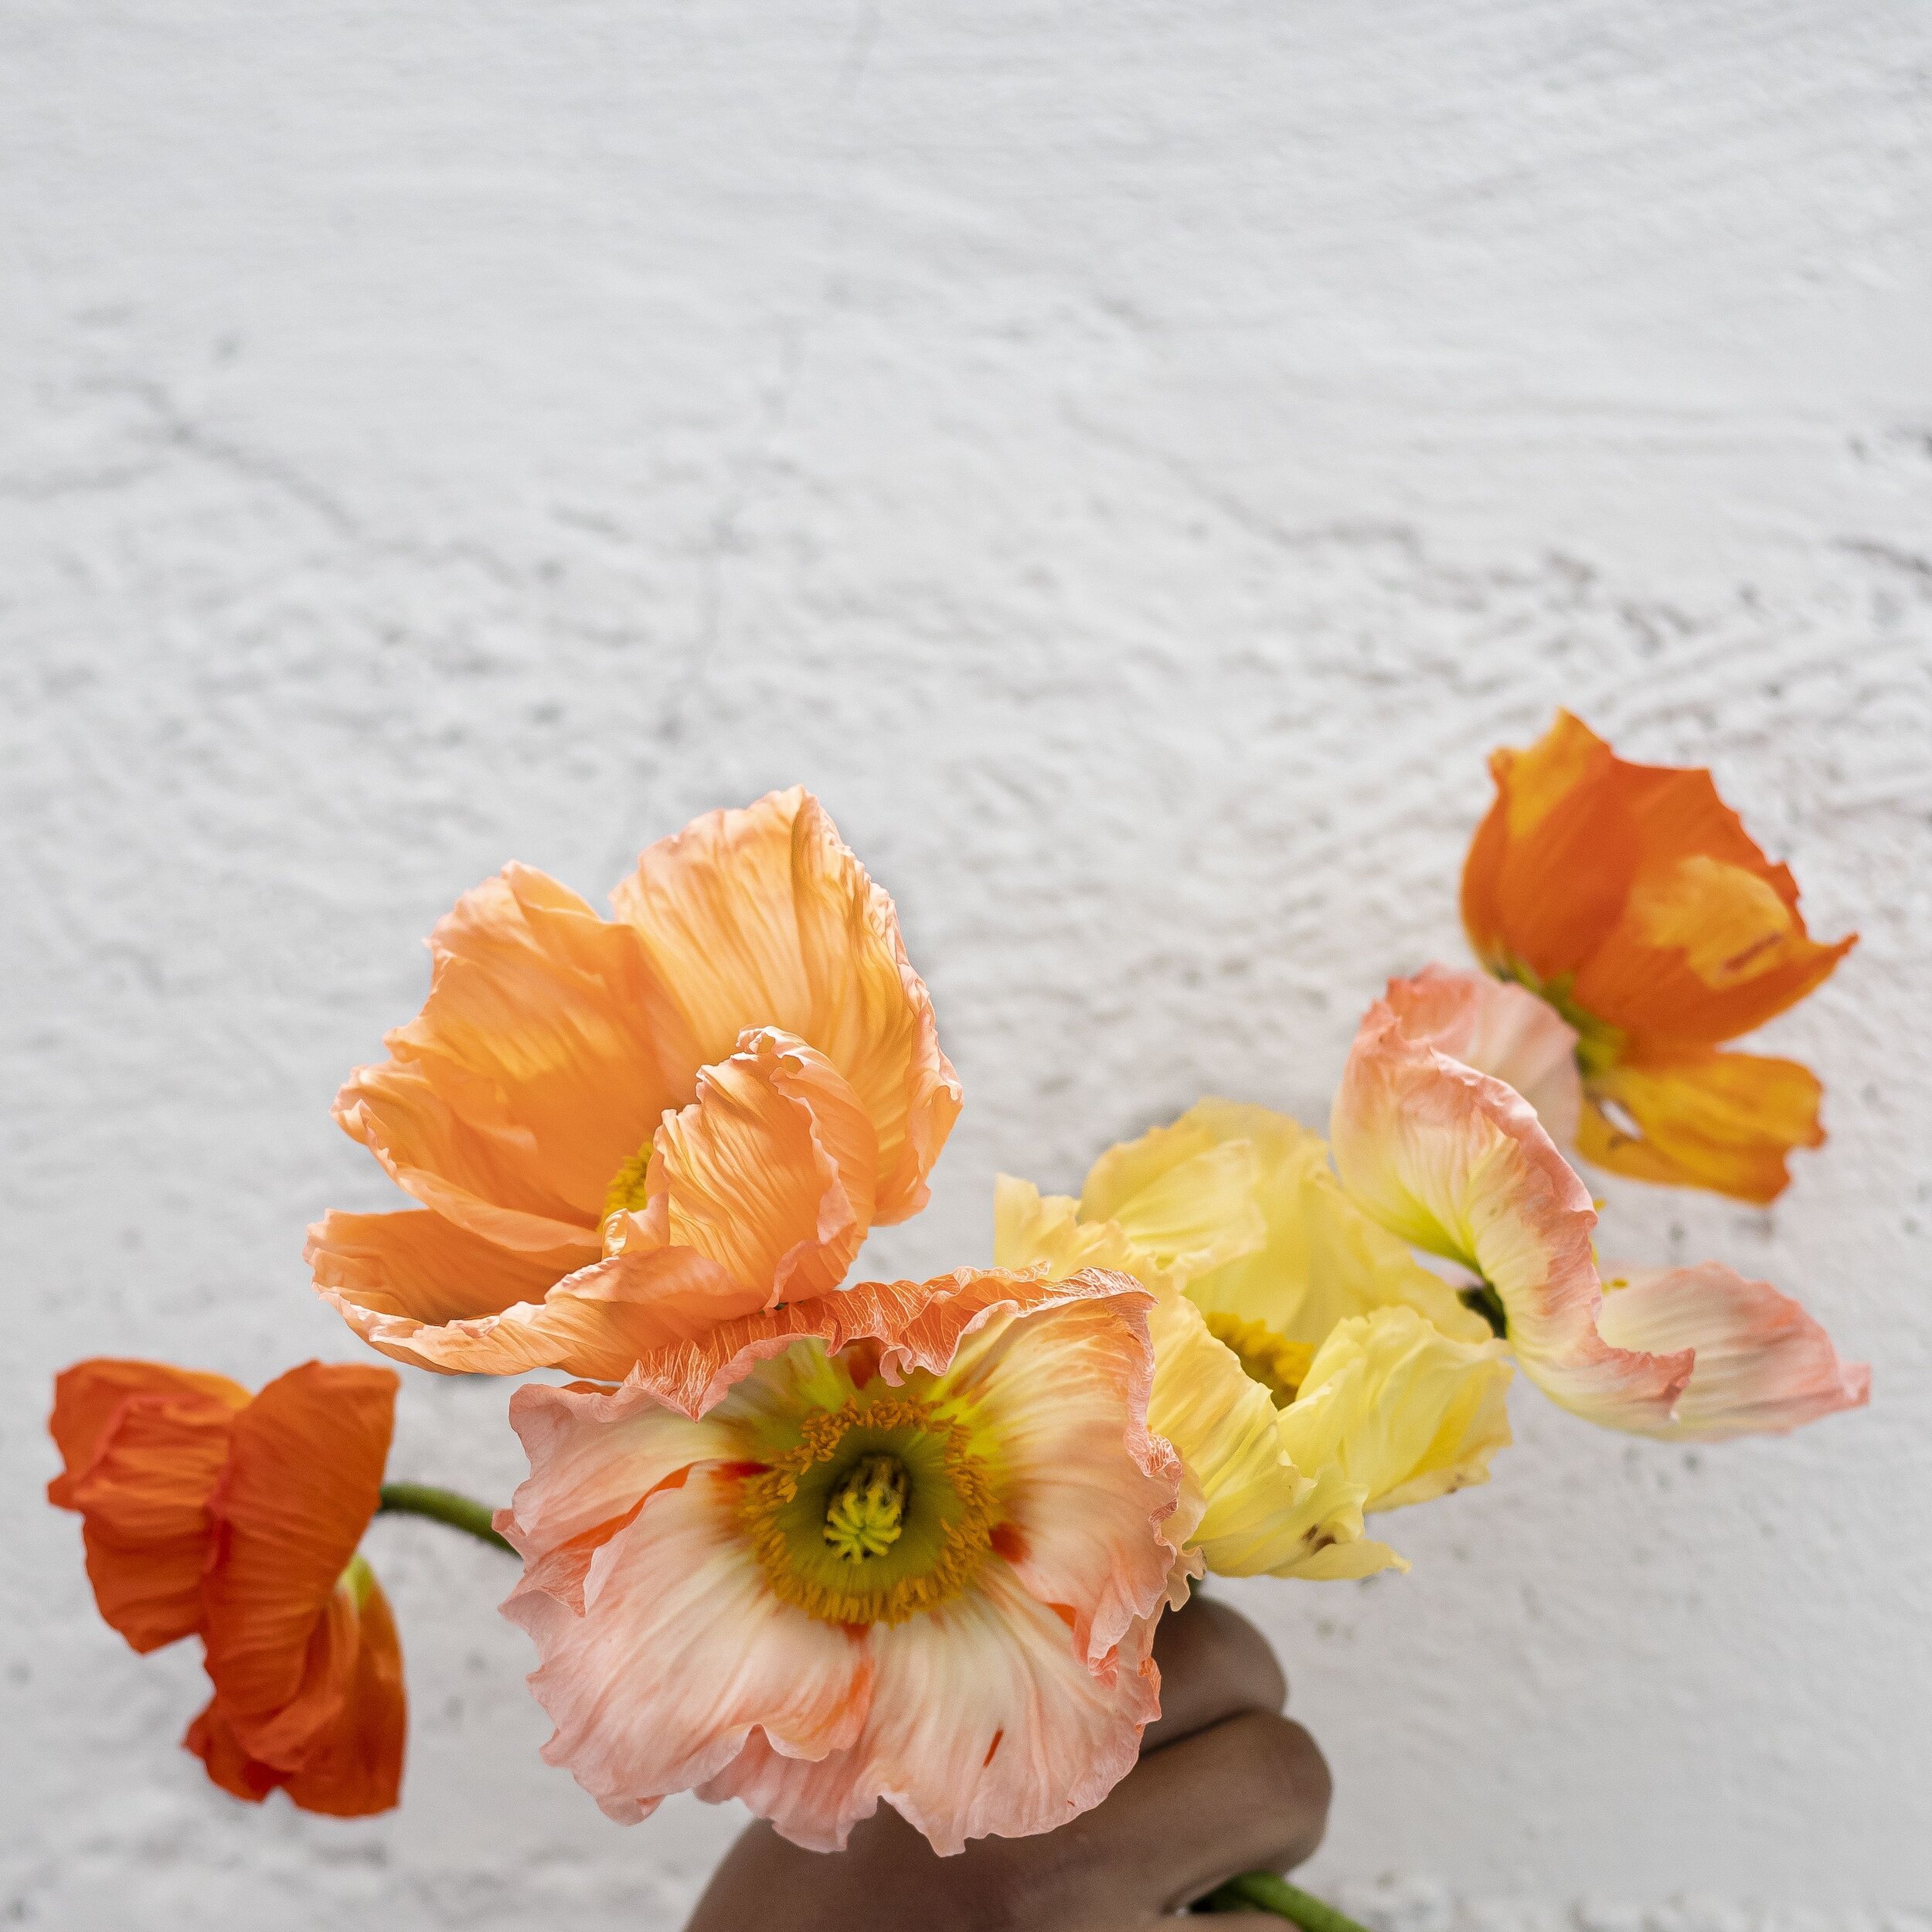 A close up of orange, peach, and yellow poppies being hand held in front of a white wall